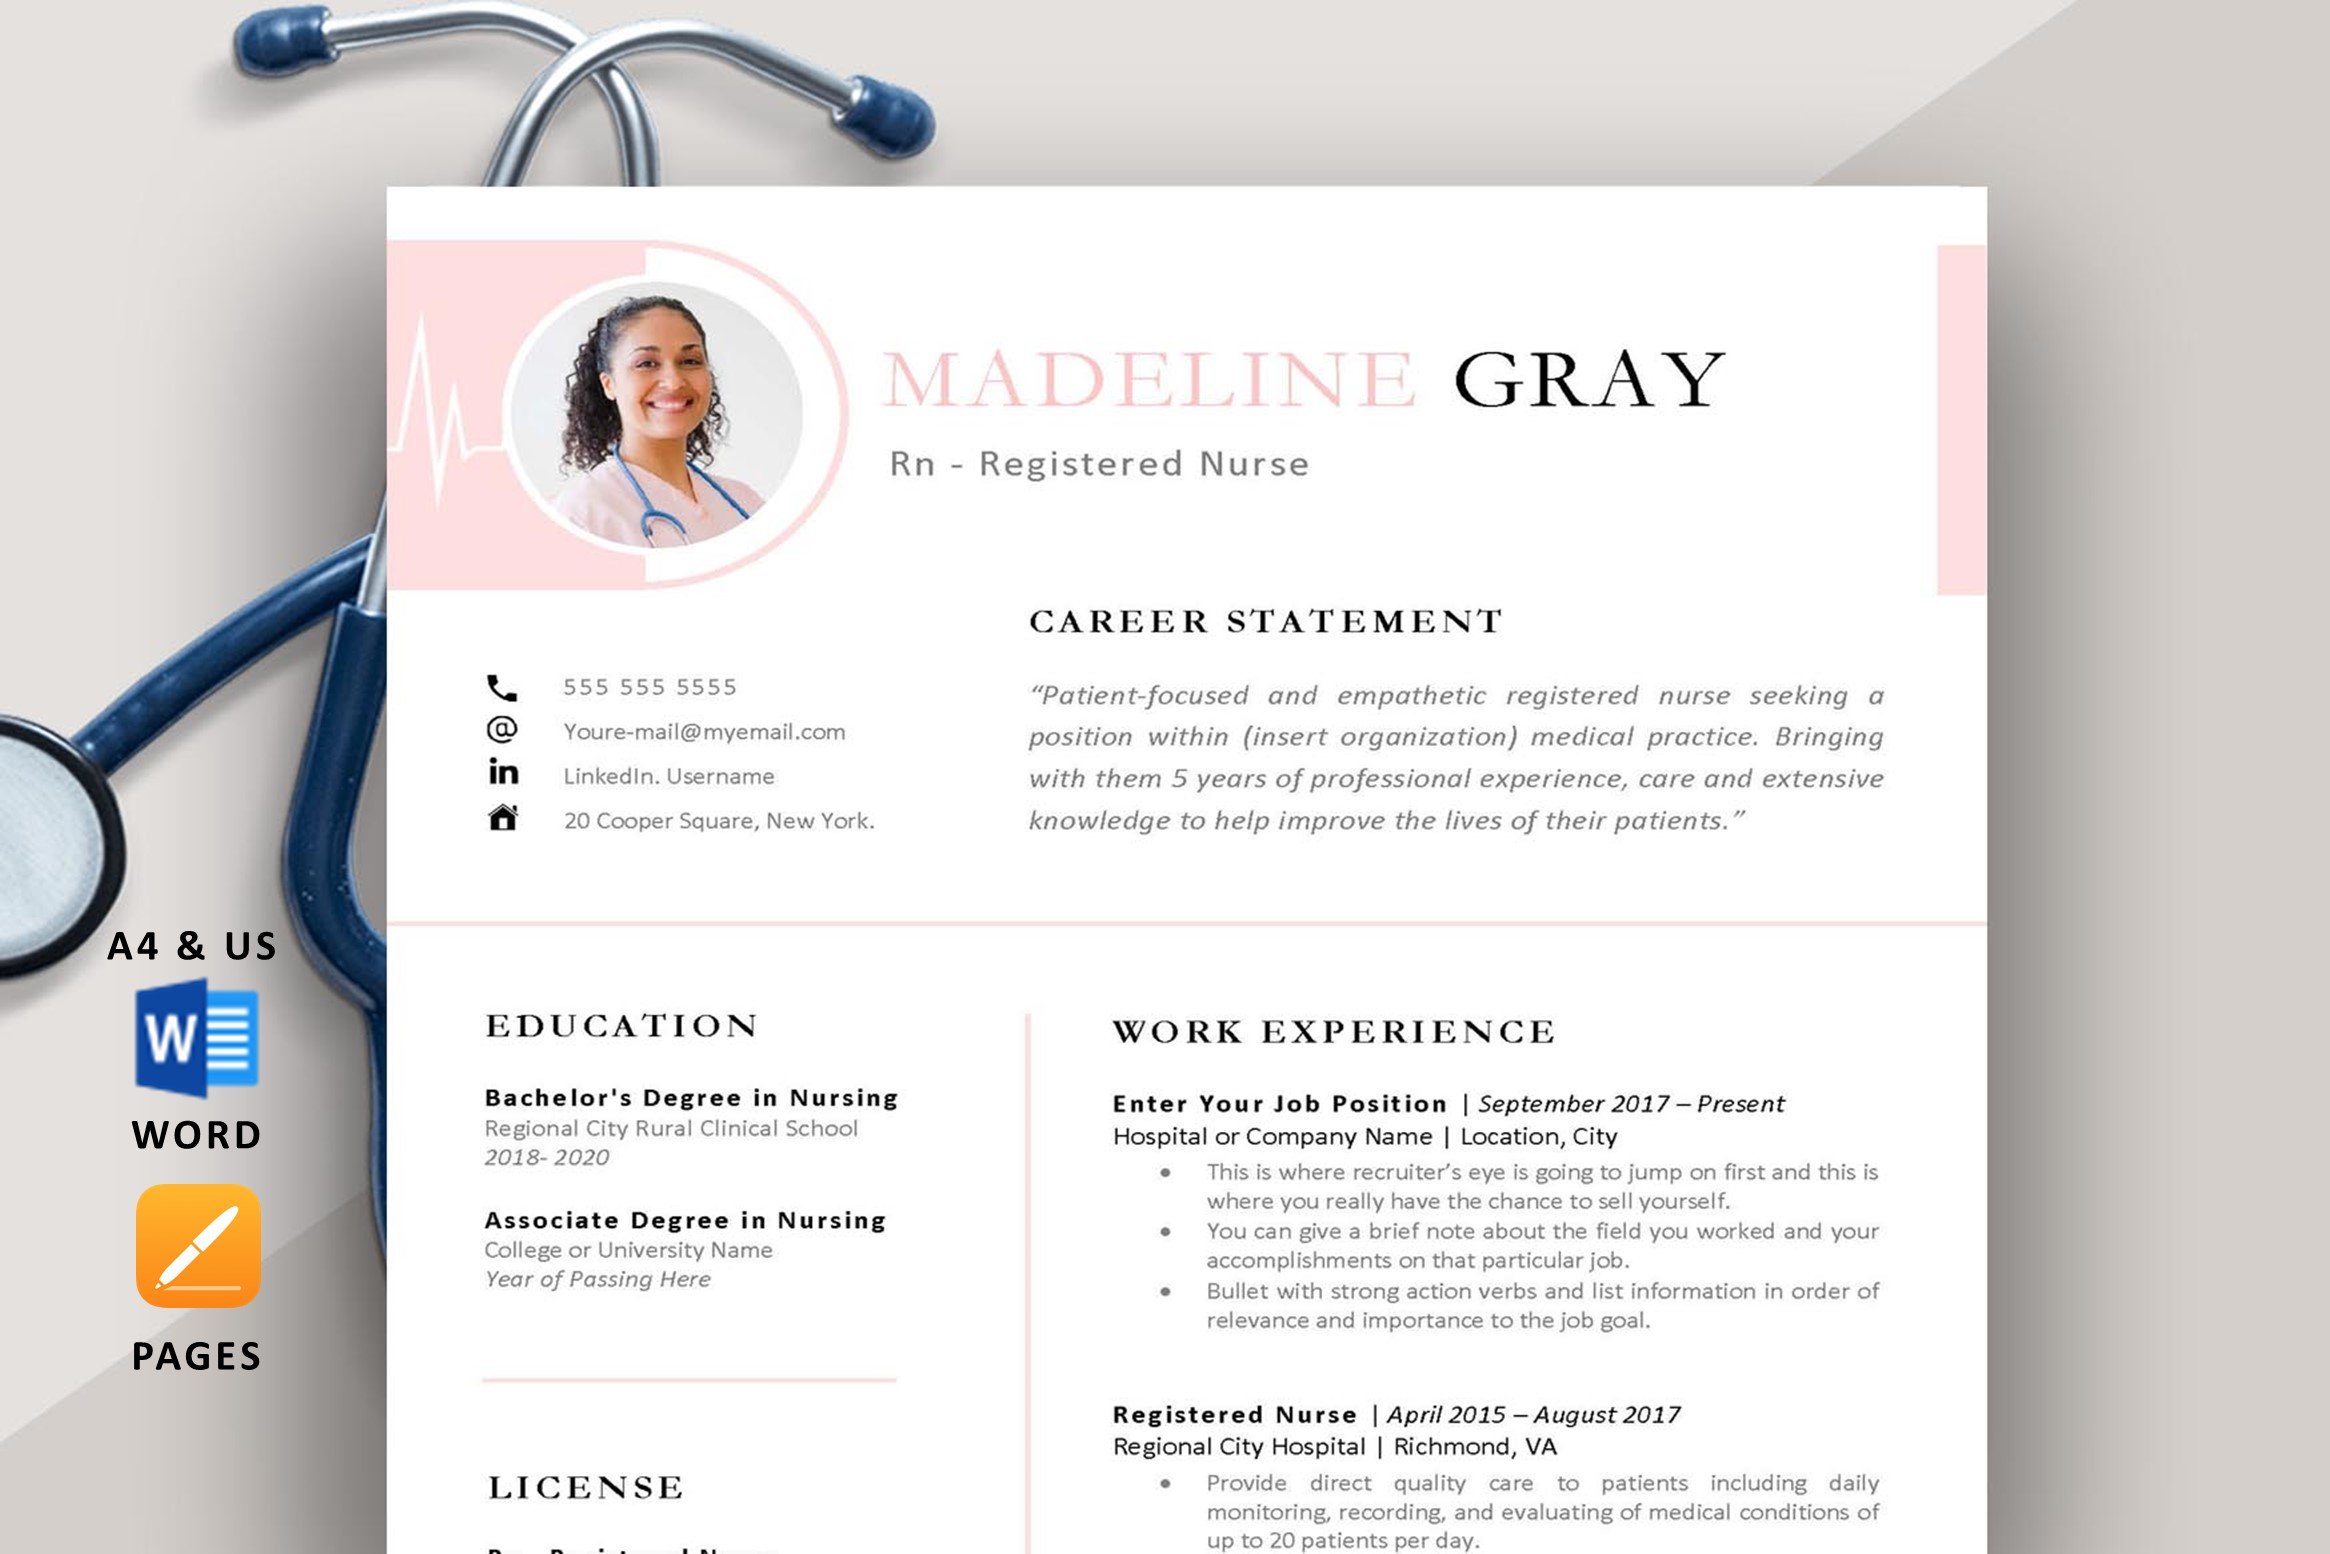 Nurse resume with a stethoscope next to it.